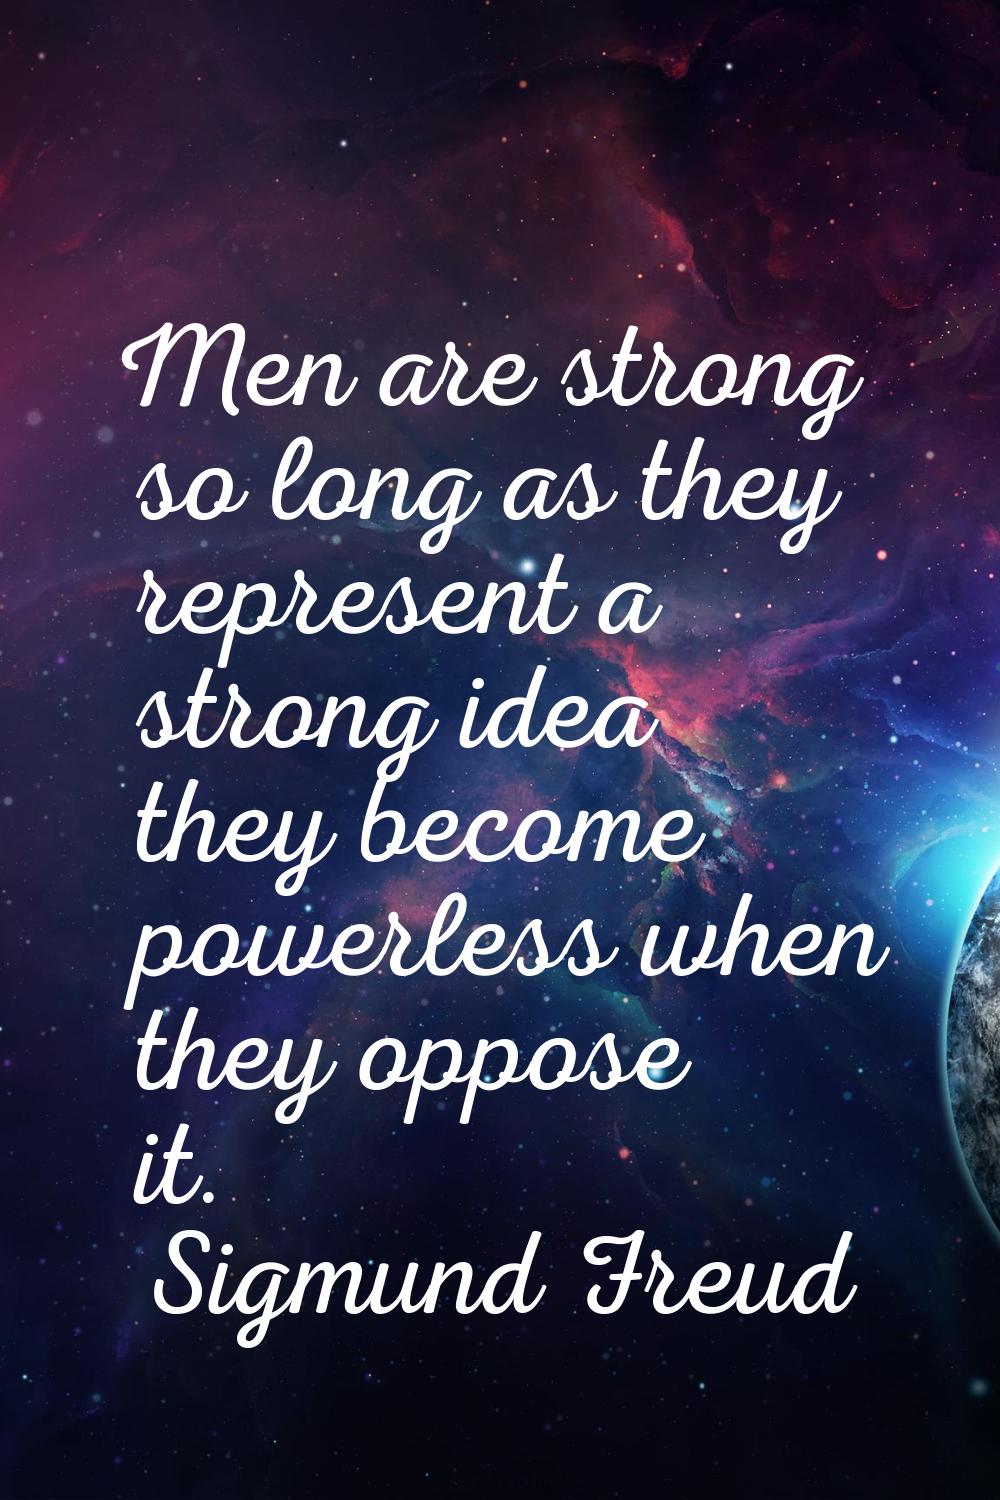 Men are strong so long as they represent a strong idea they become powerless when they oppose it.